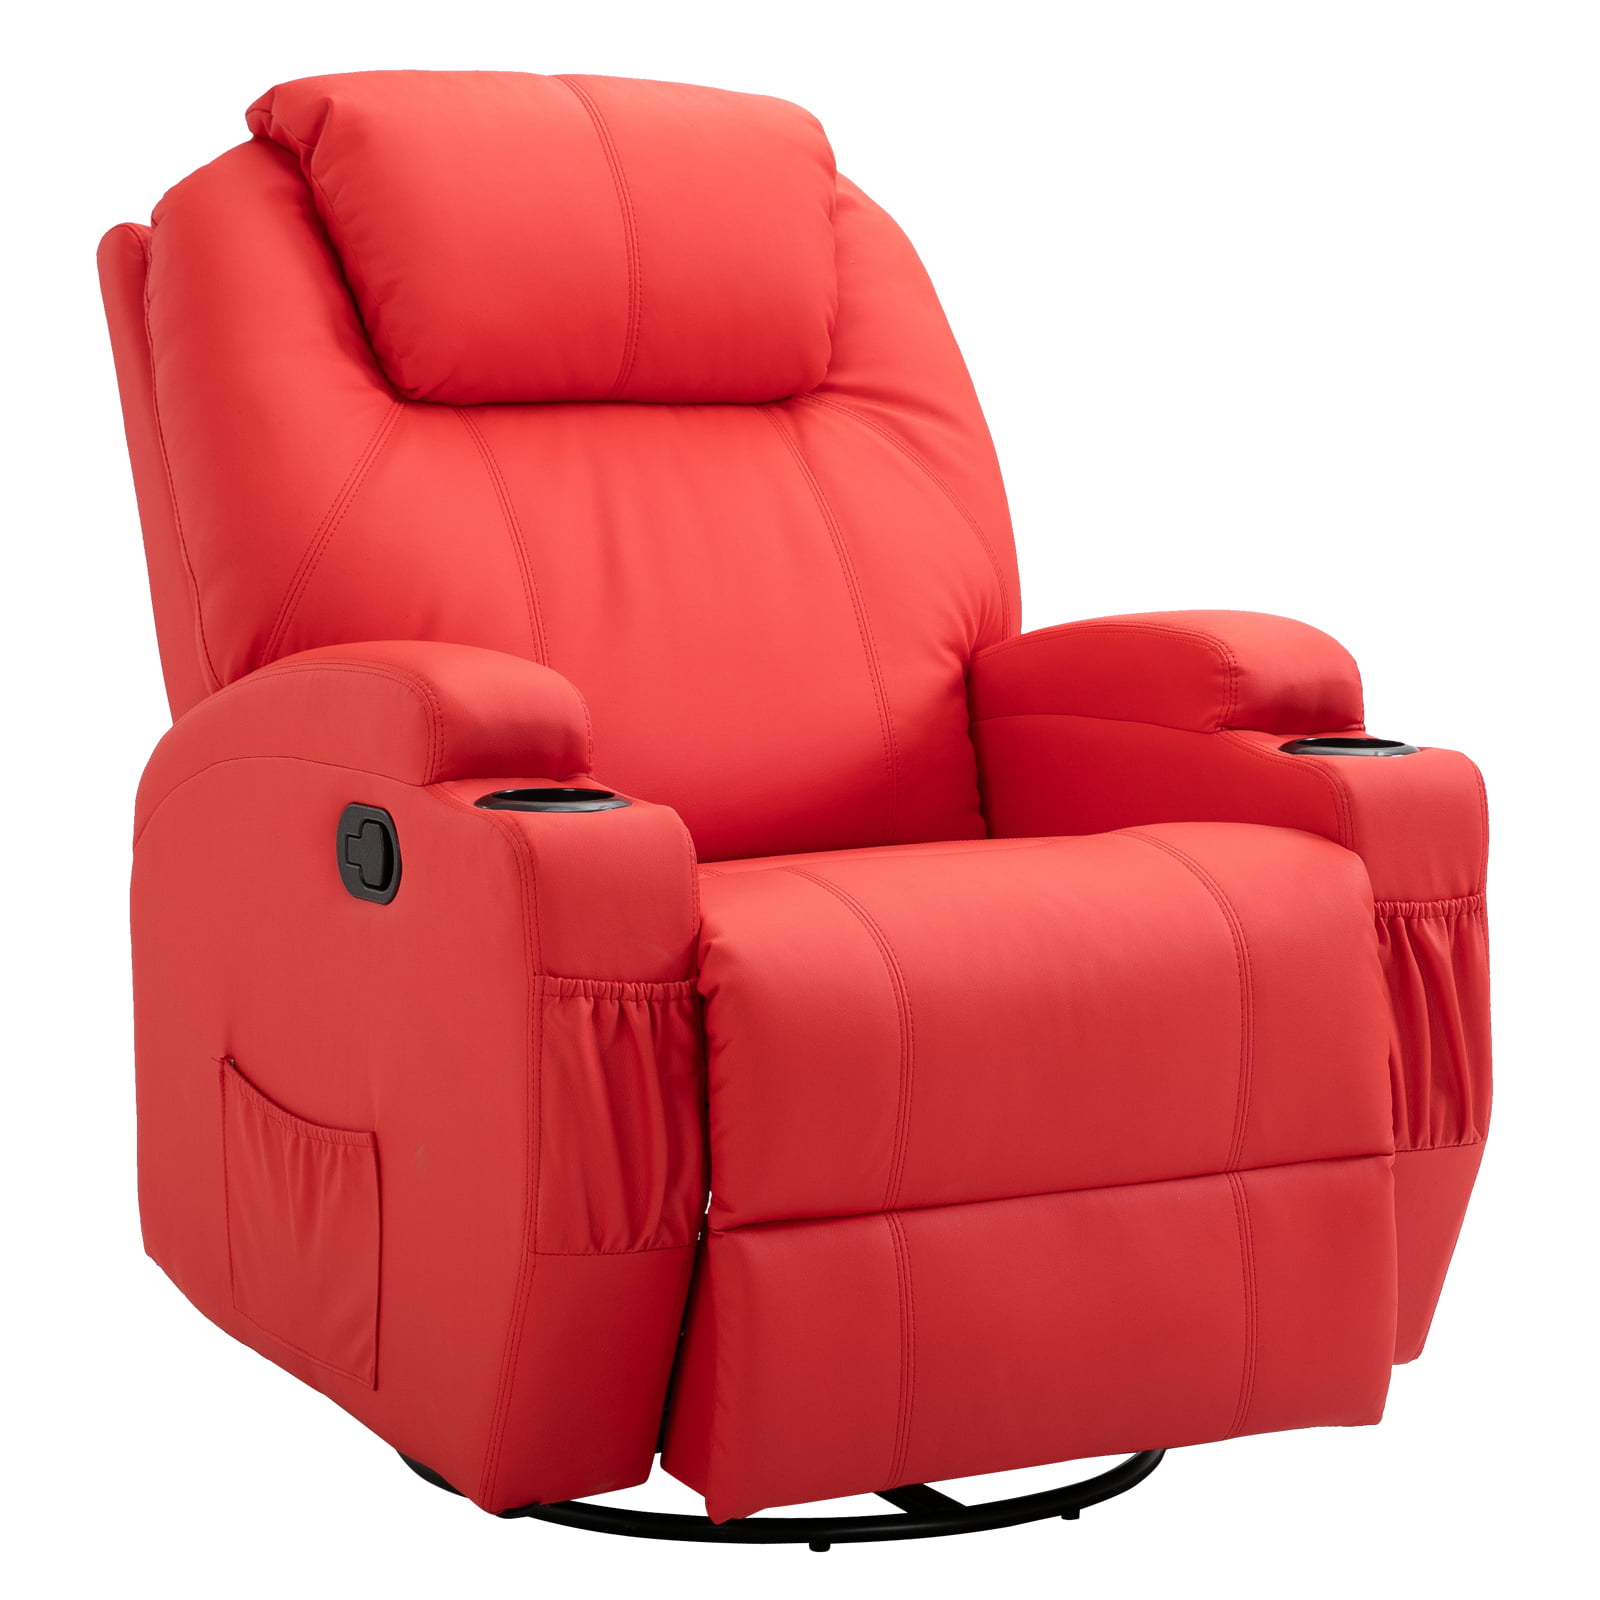 HOMCOM Luxury Faux Leather Heated Vibrating Massage Recliner Chair with